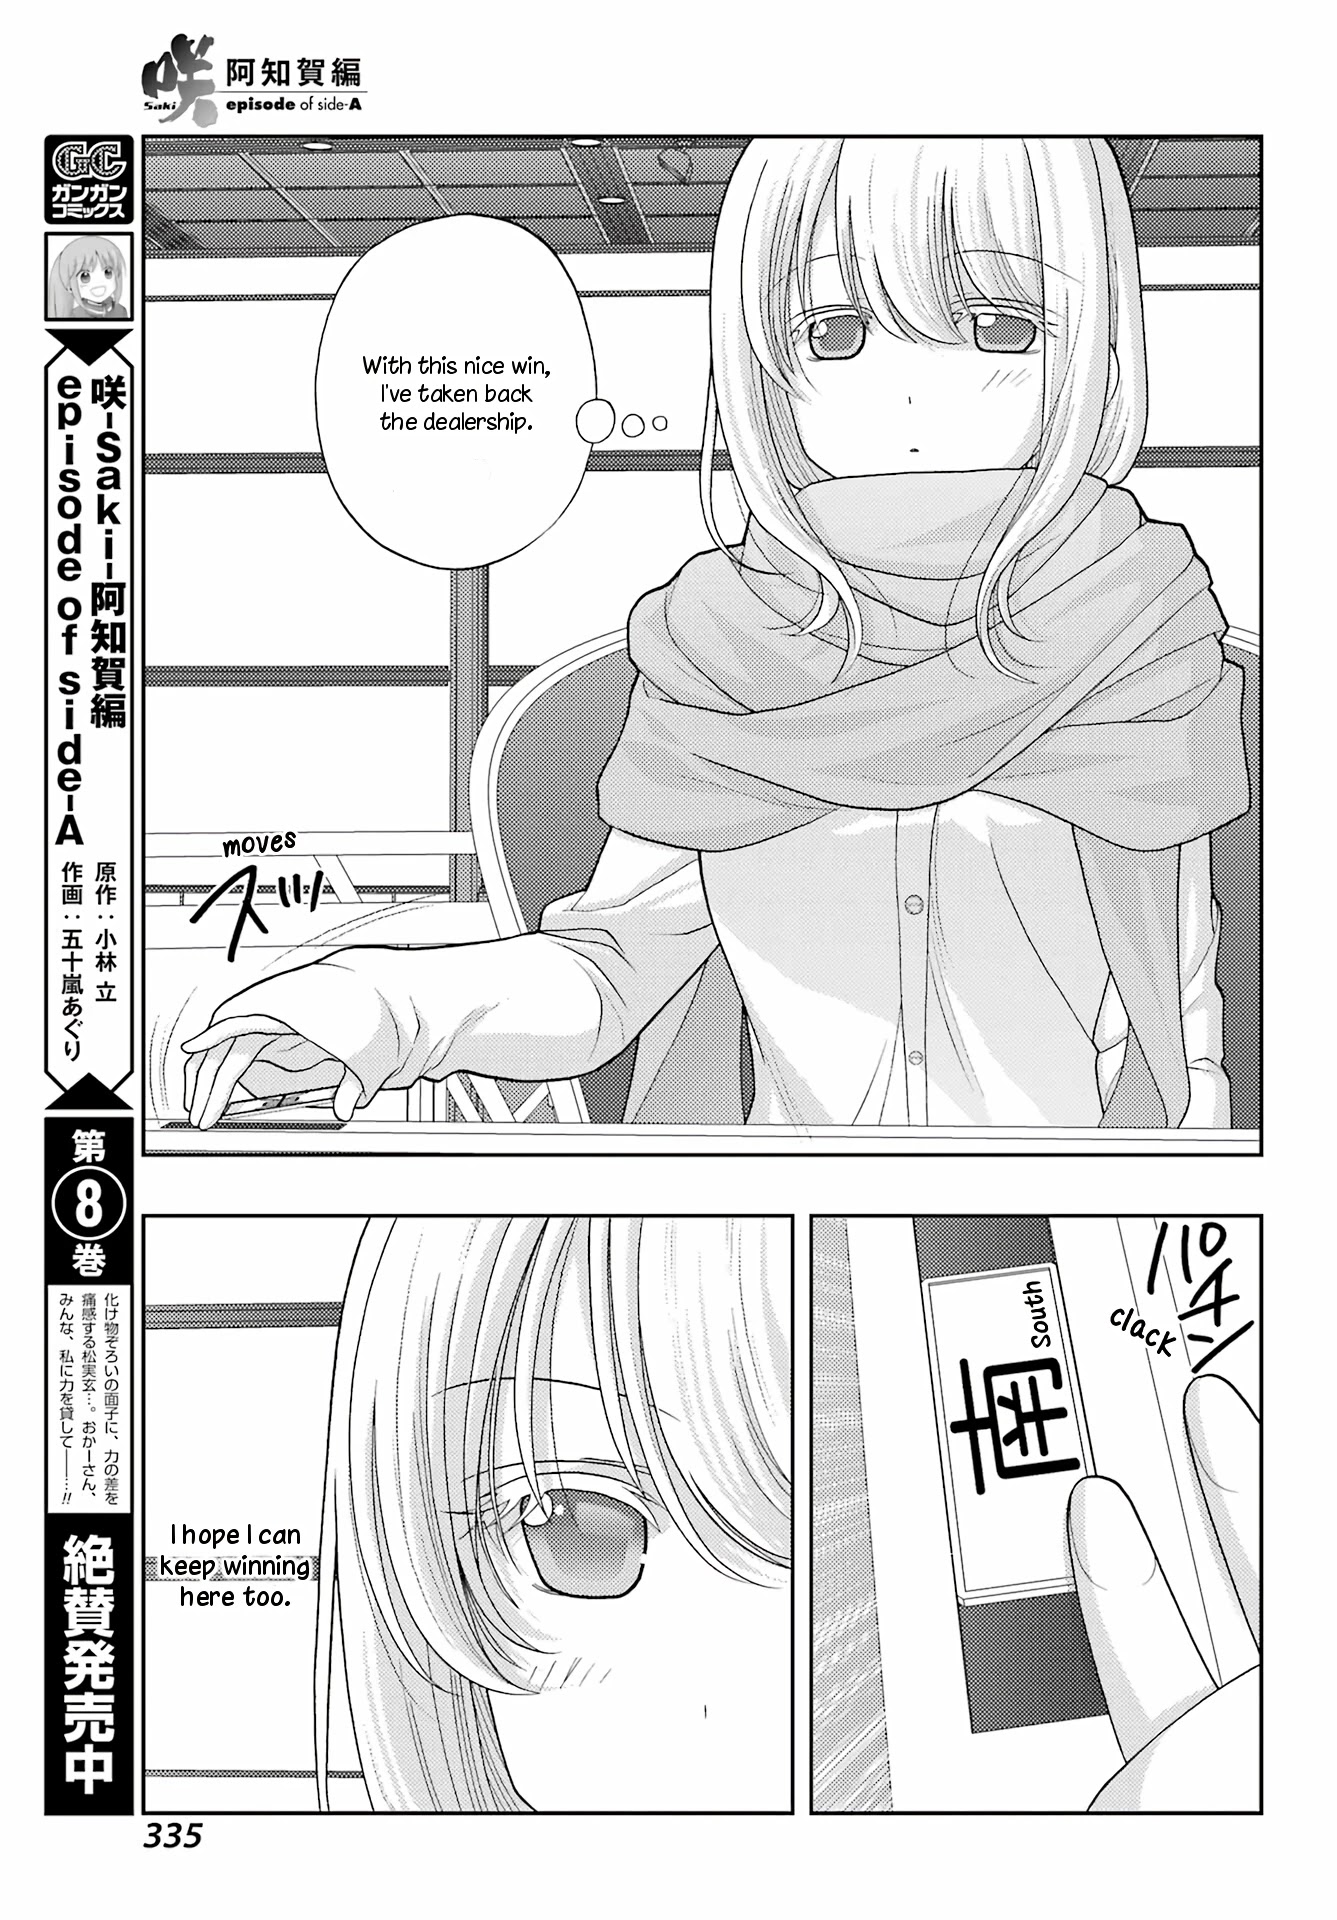 Saki: Achiga-Hen - Episode Of Side-A - New Series Chapter 40: Aim - Picture 3